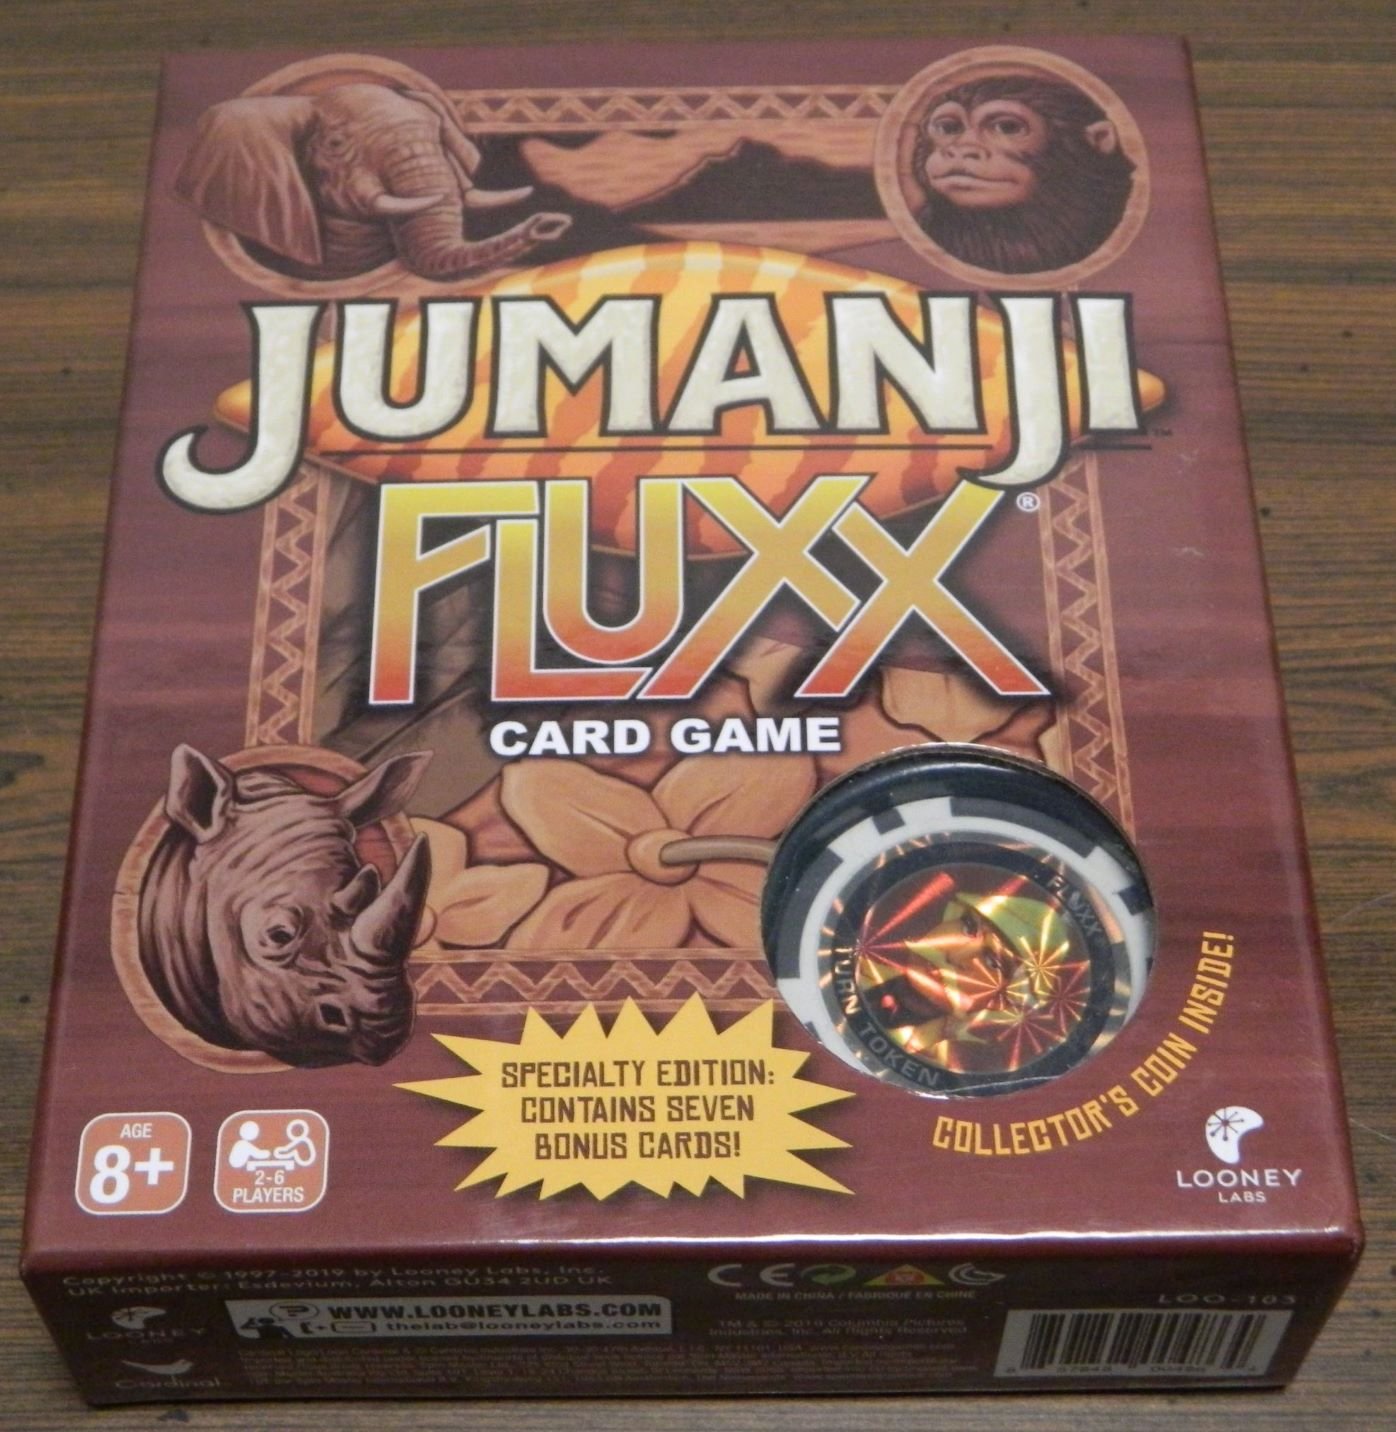 Jumanji Fluxx Card Game Review and Rules - Geeky Hobbies